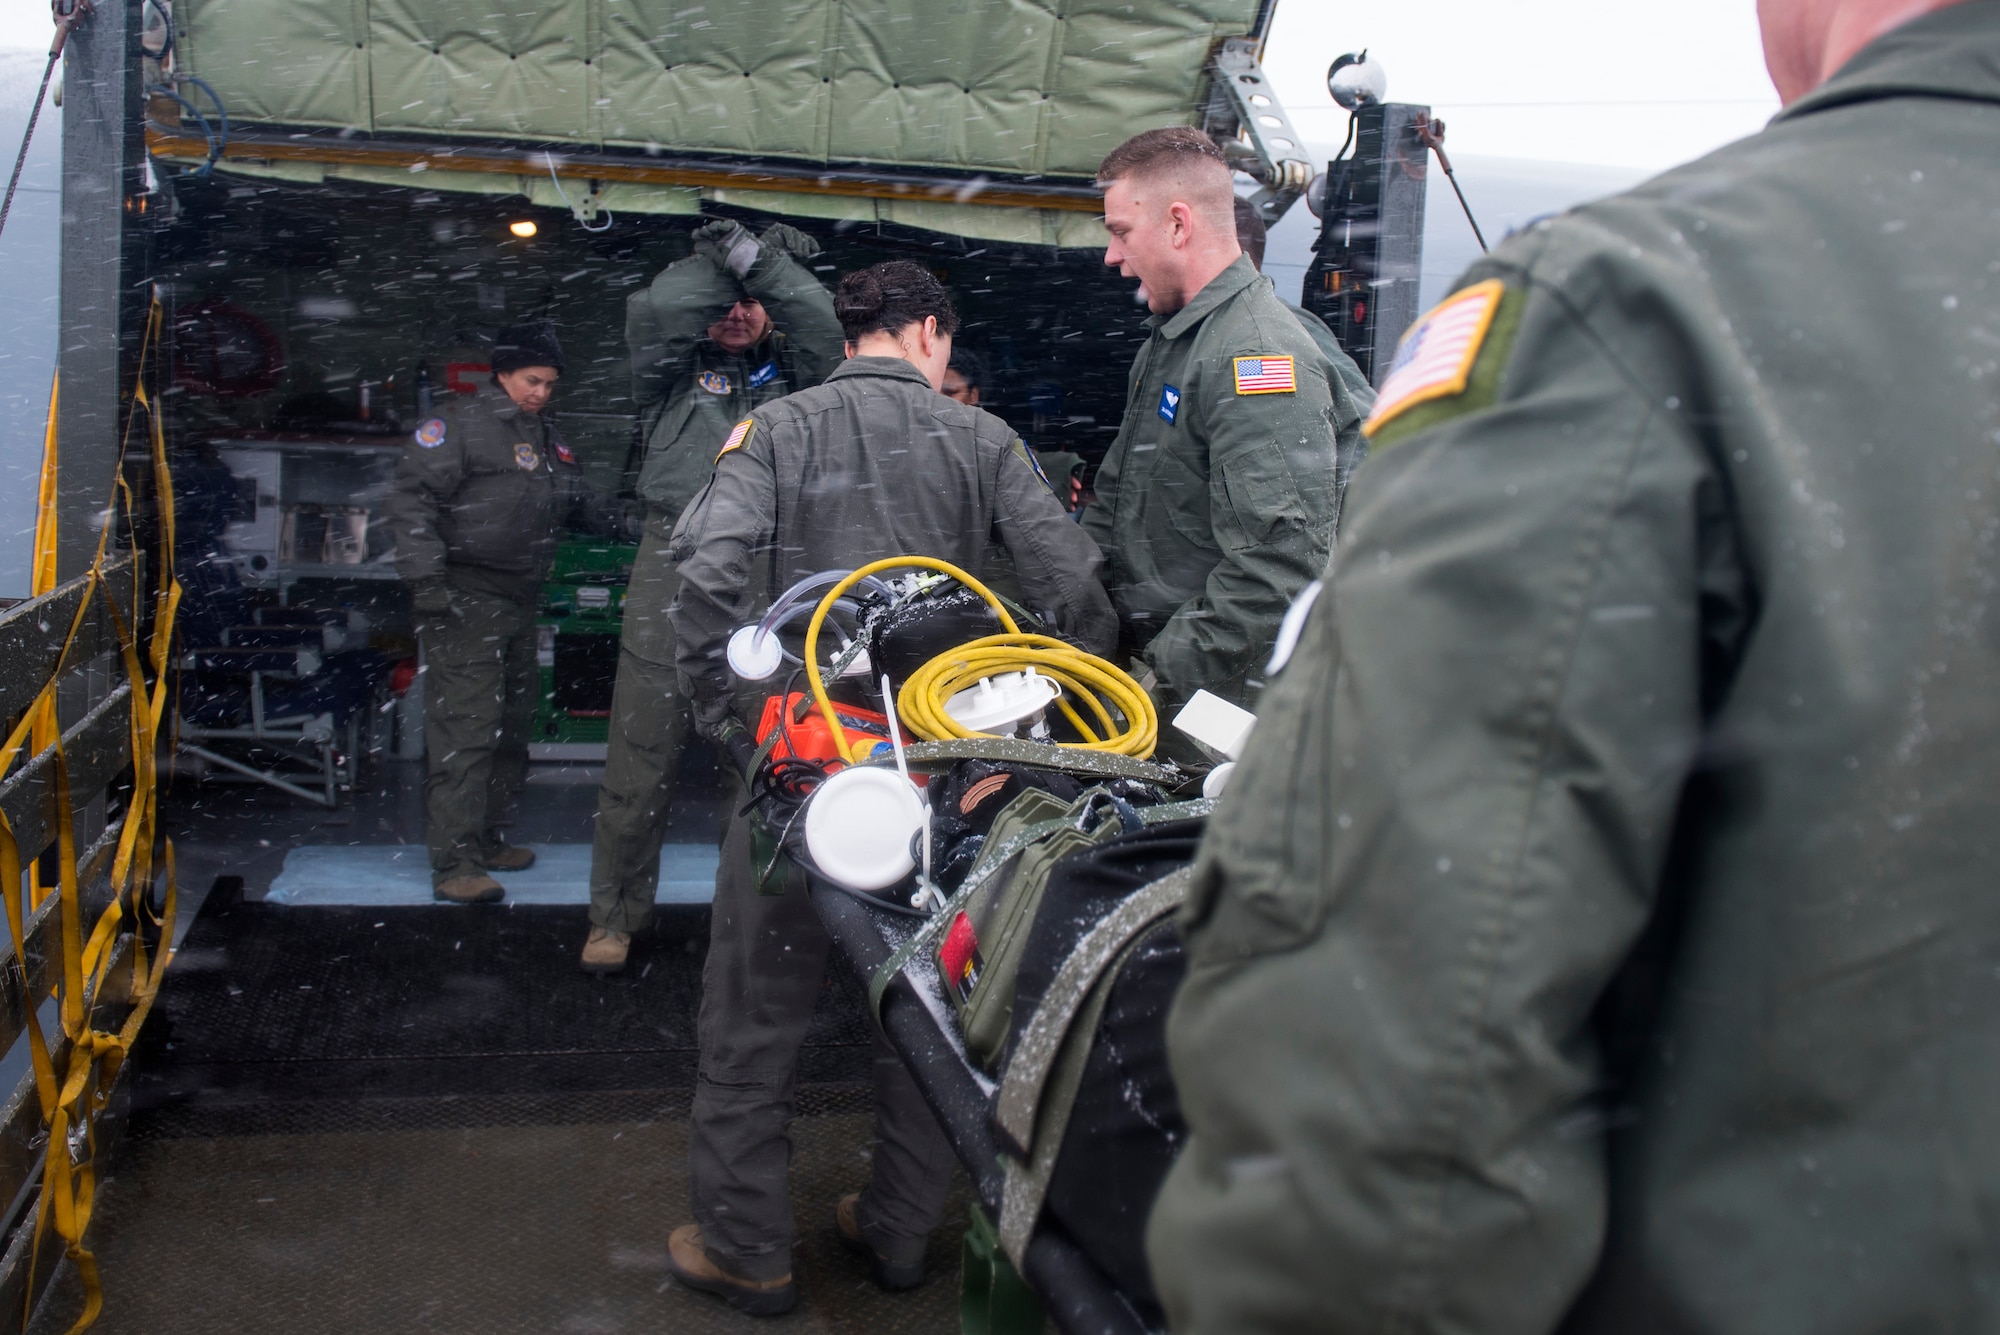 Airmen from the 375th Aeromedical Evacuation Squadron transport a patient litter onto a KC-135 Stratotanker during an aeromedical evacuation training at Fairchild Air Force Base, Washington, March 1, 2018. Practicing when to lift, move, stop and place equipment allows AE teams to maneuver patients with safety and efficiency. (U.S. Air Force photo/Airman 1st Class Whitney Laine)